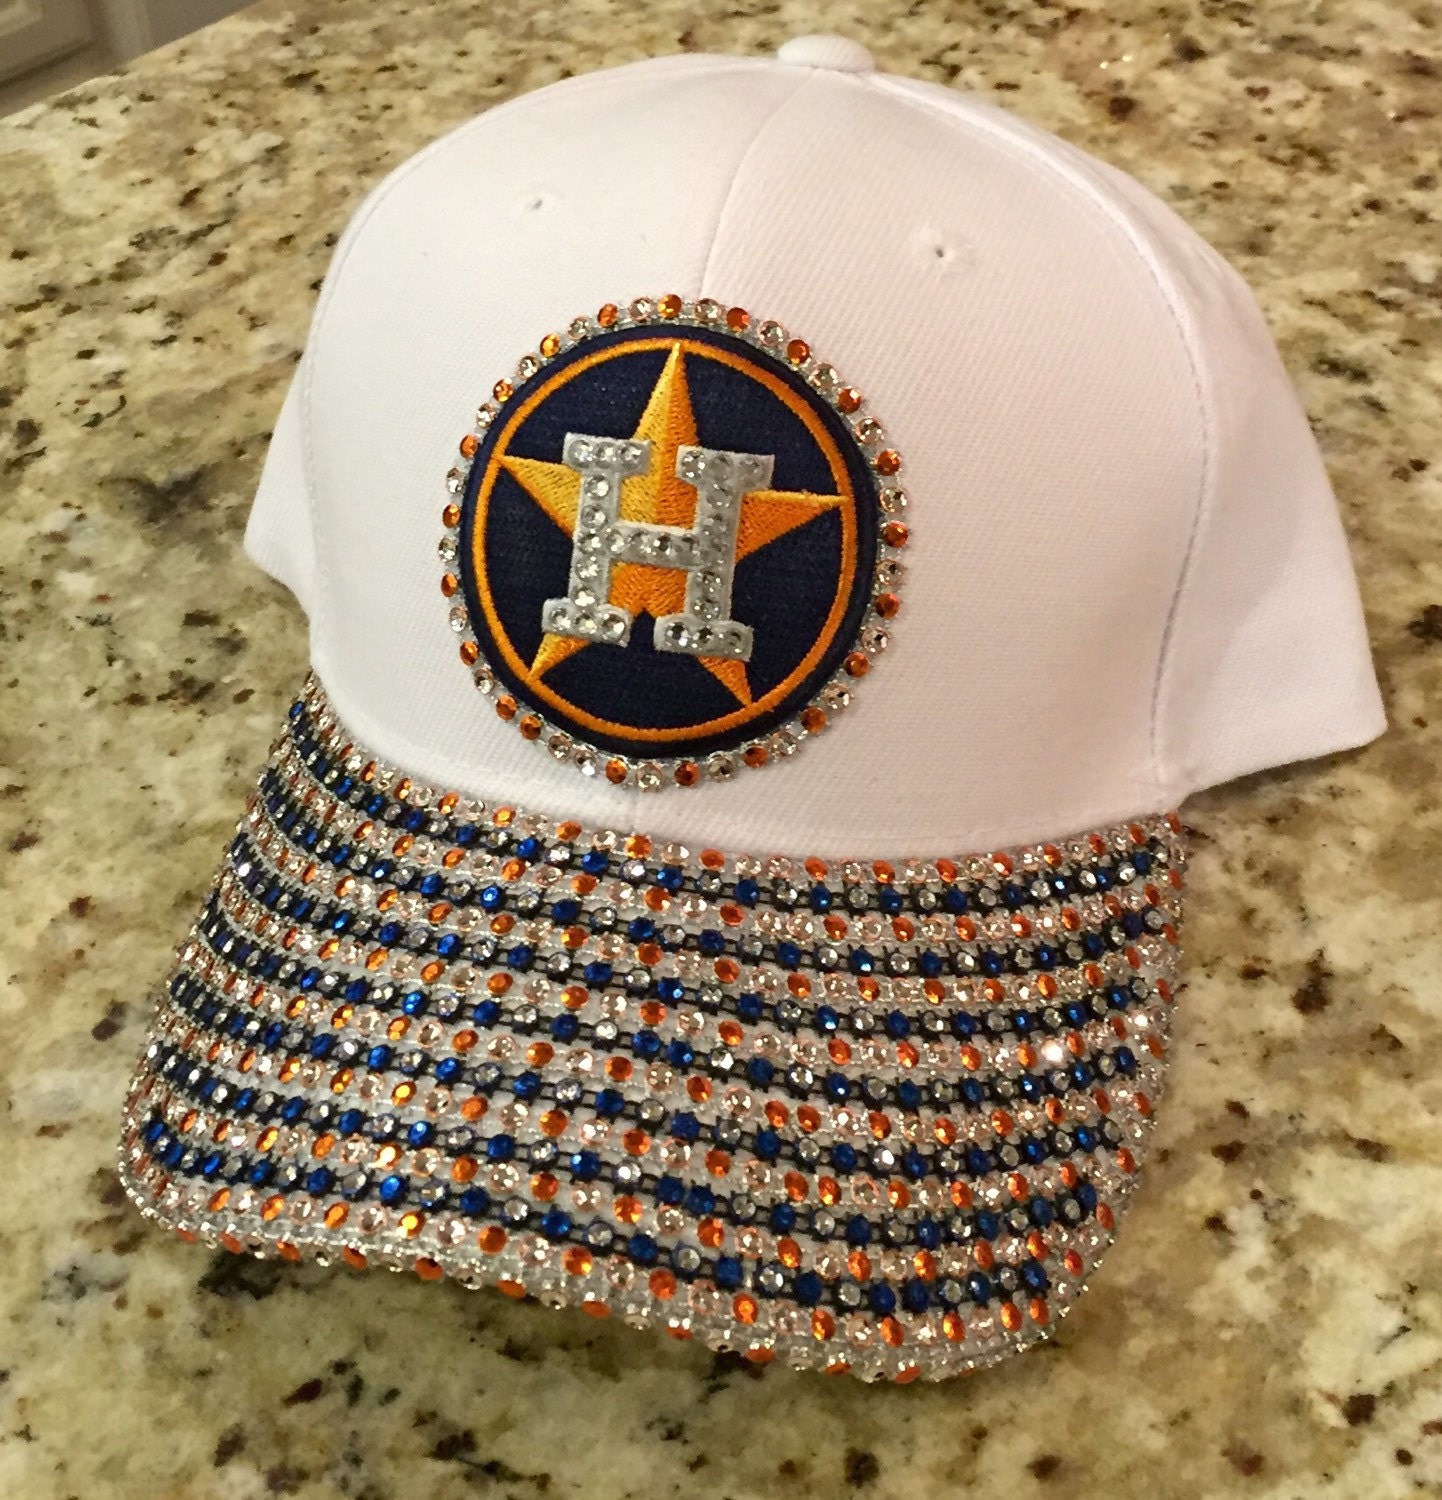 Houston Astros Bling Cap by BlingBlingLicious on Etsy